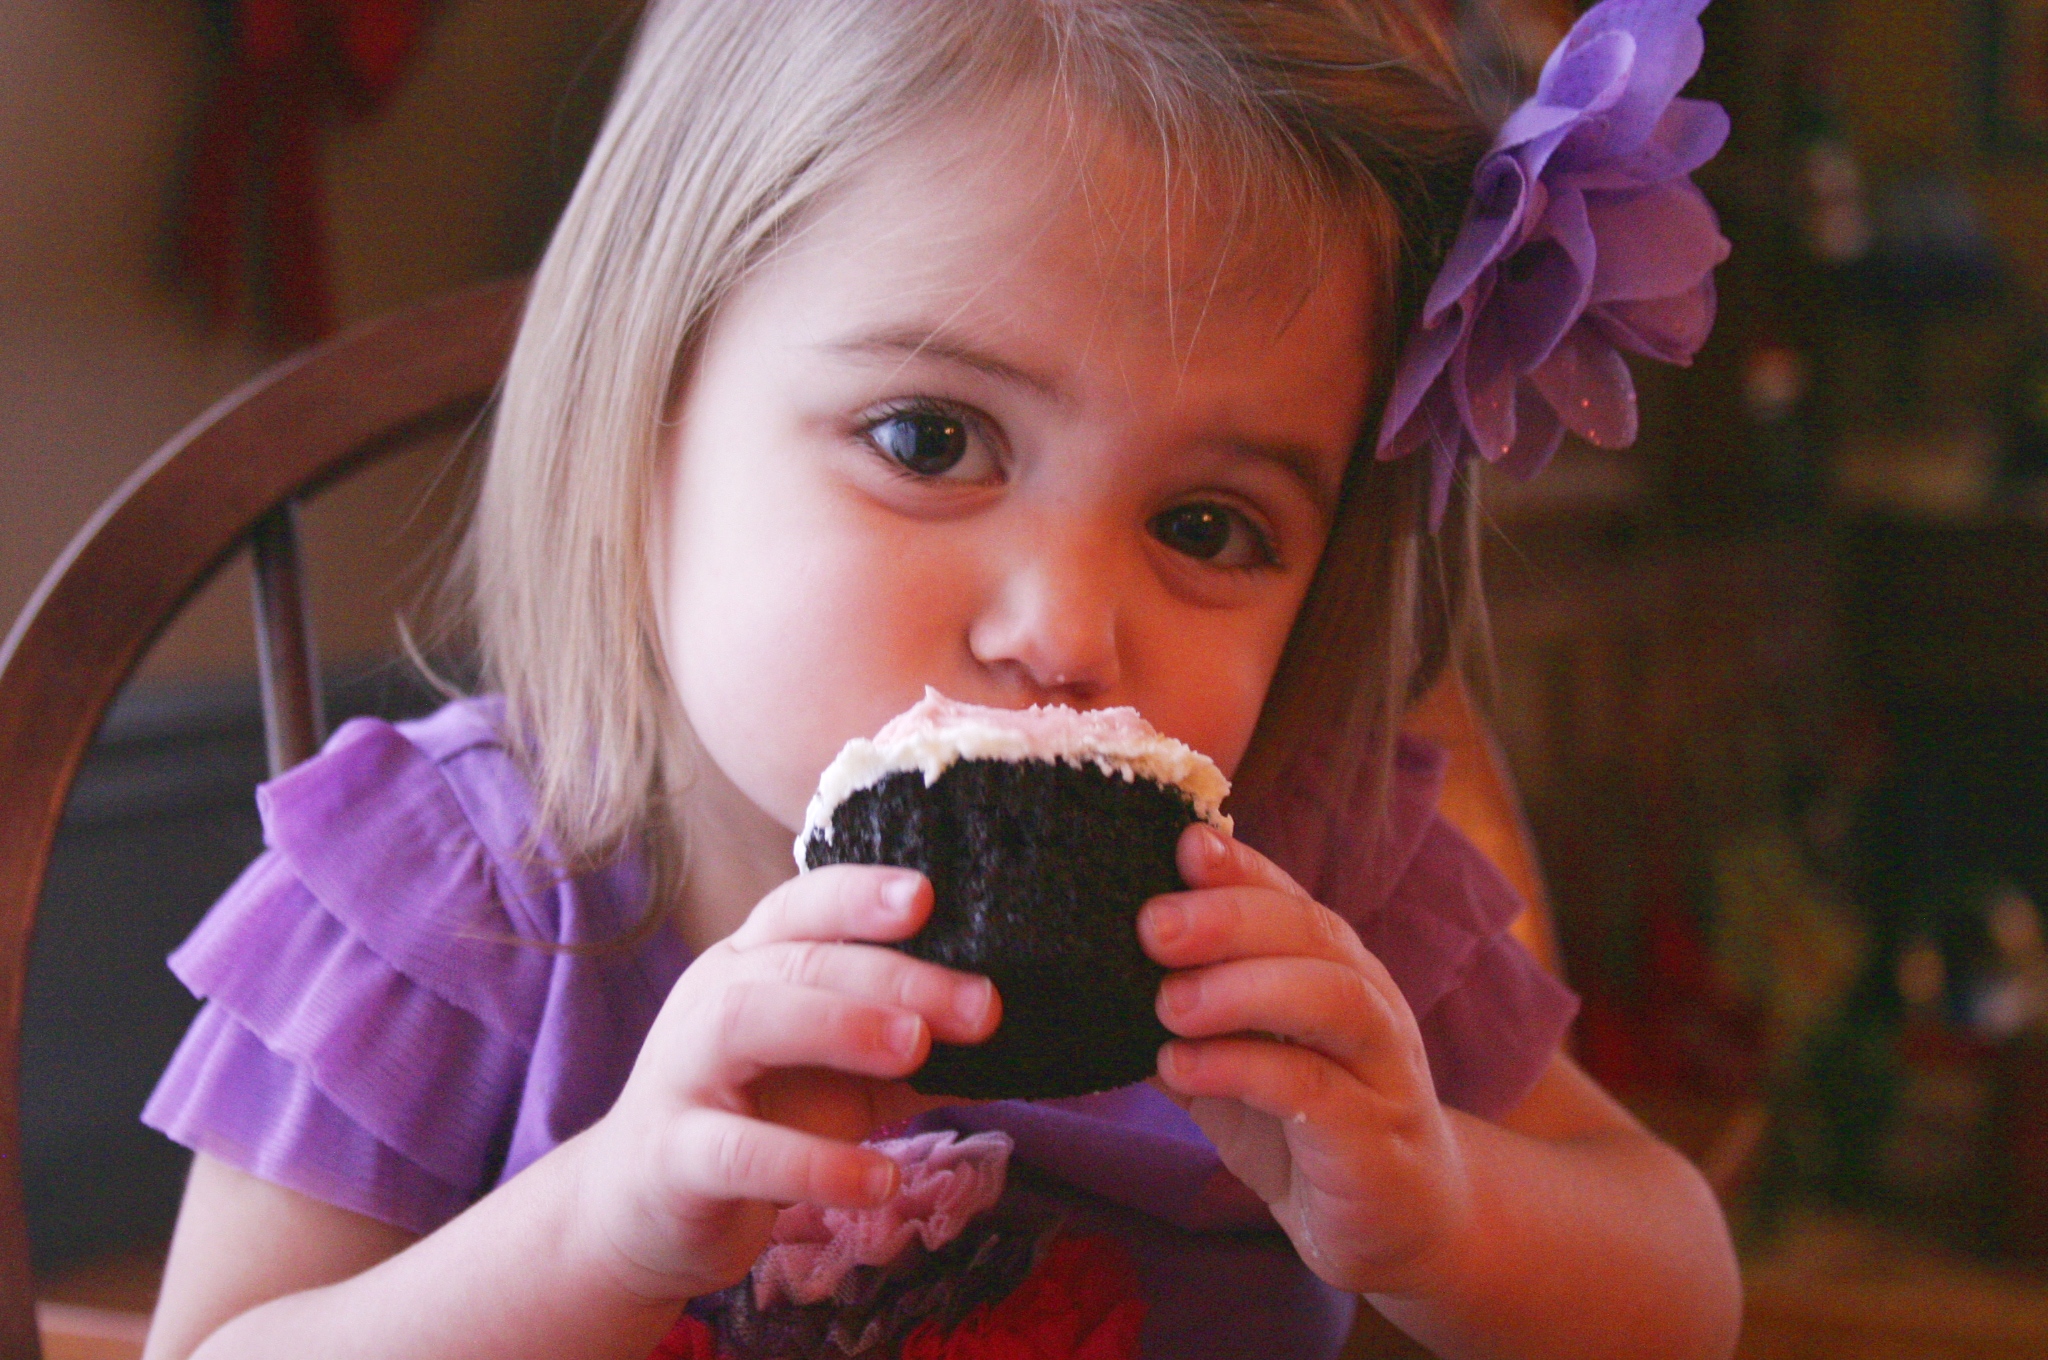 Nora with cupcake edited